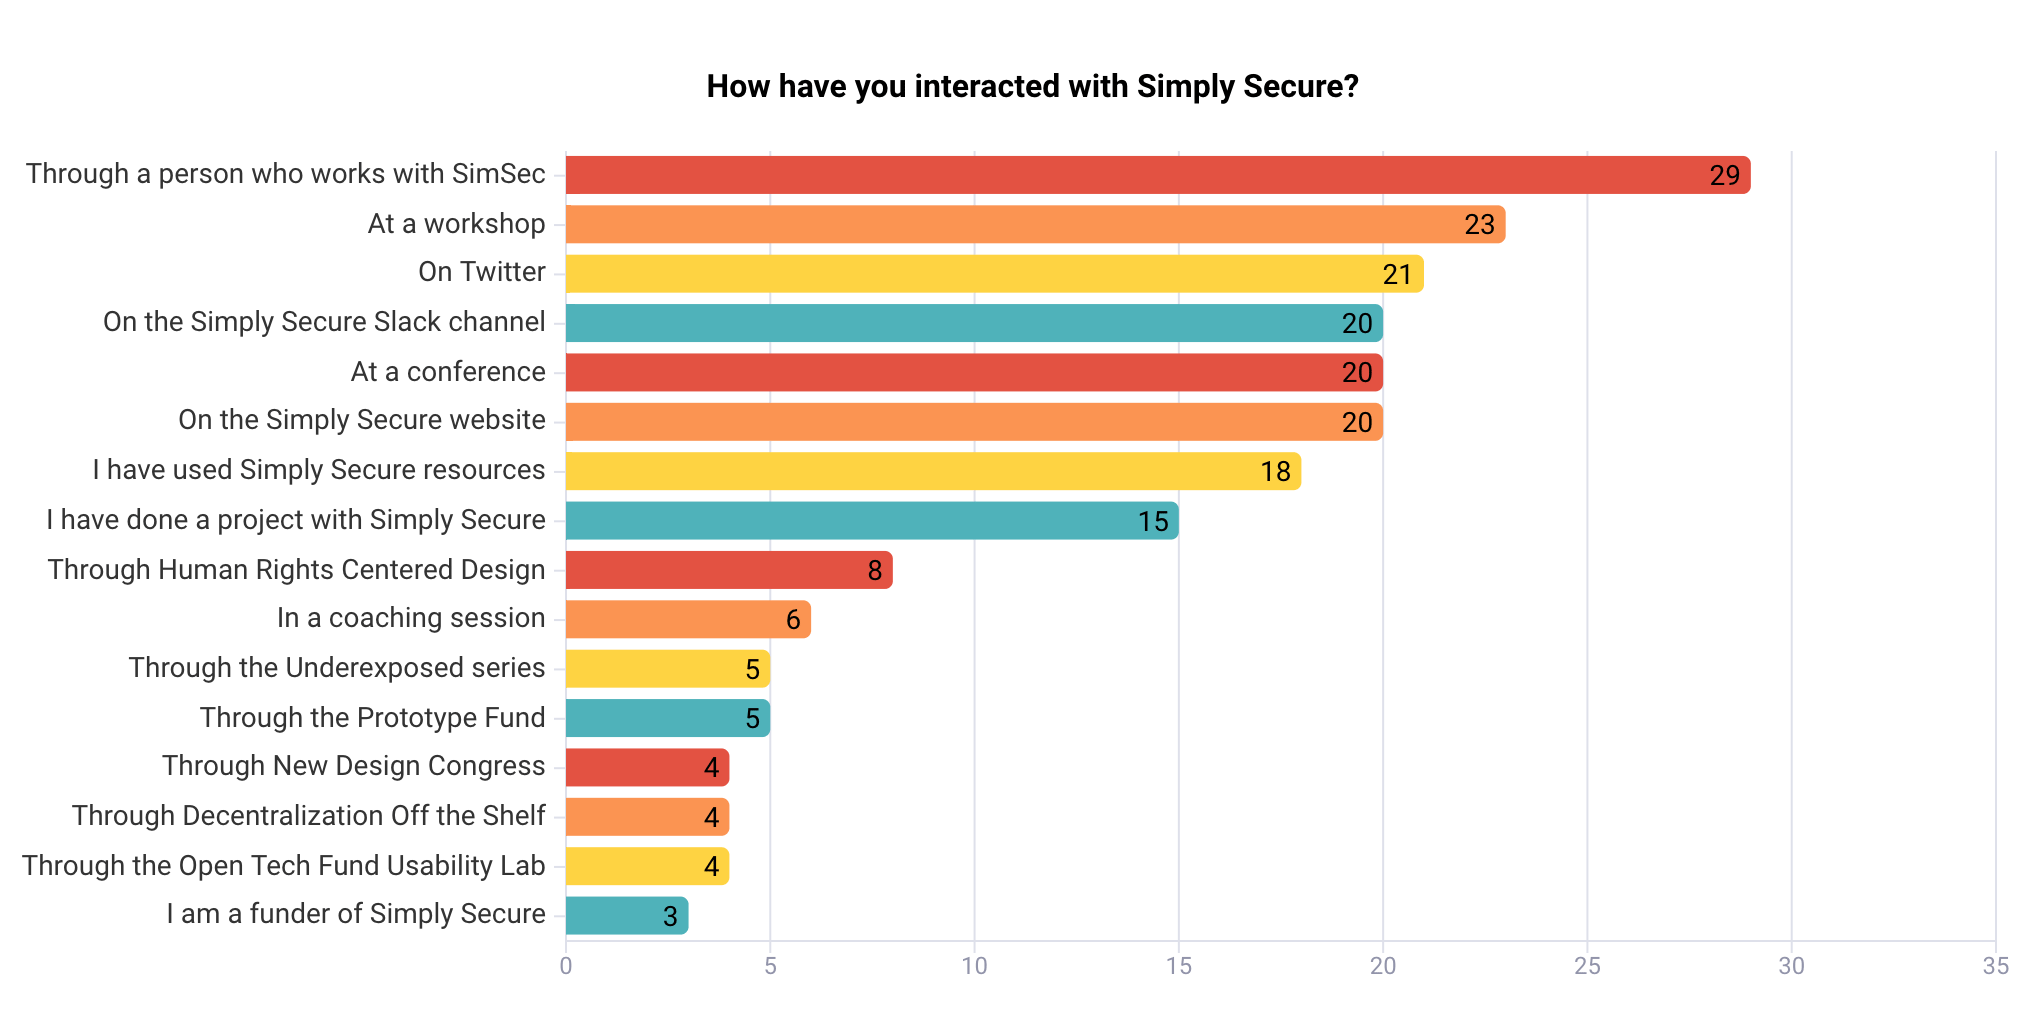 Breakdown of how people know about us (multi-select). Top answers: through a person who works with SimSec (29), at a workshop (23), on Twitter (21), on Slack (20), at a conference (20, on the SimSec website (20))